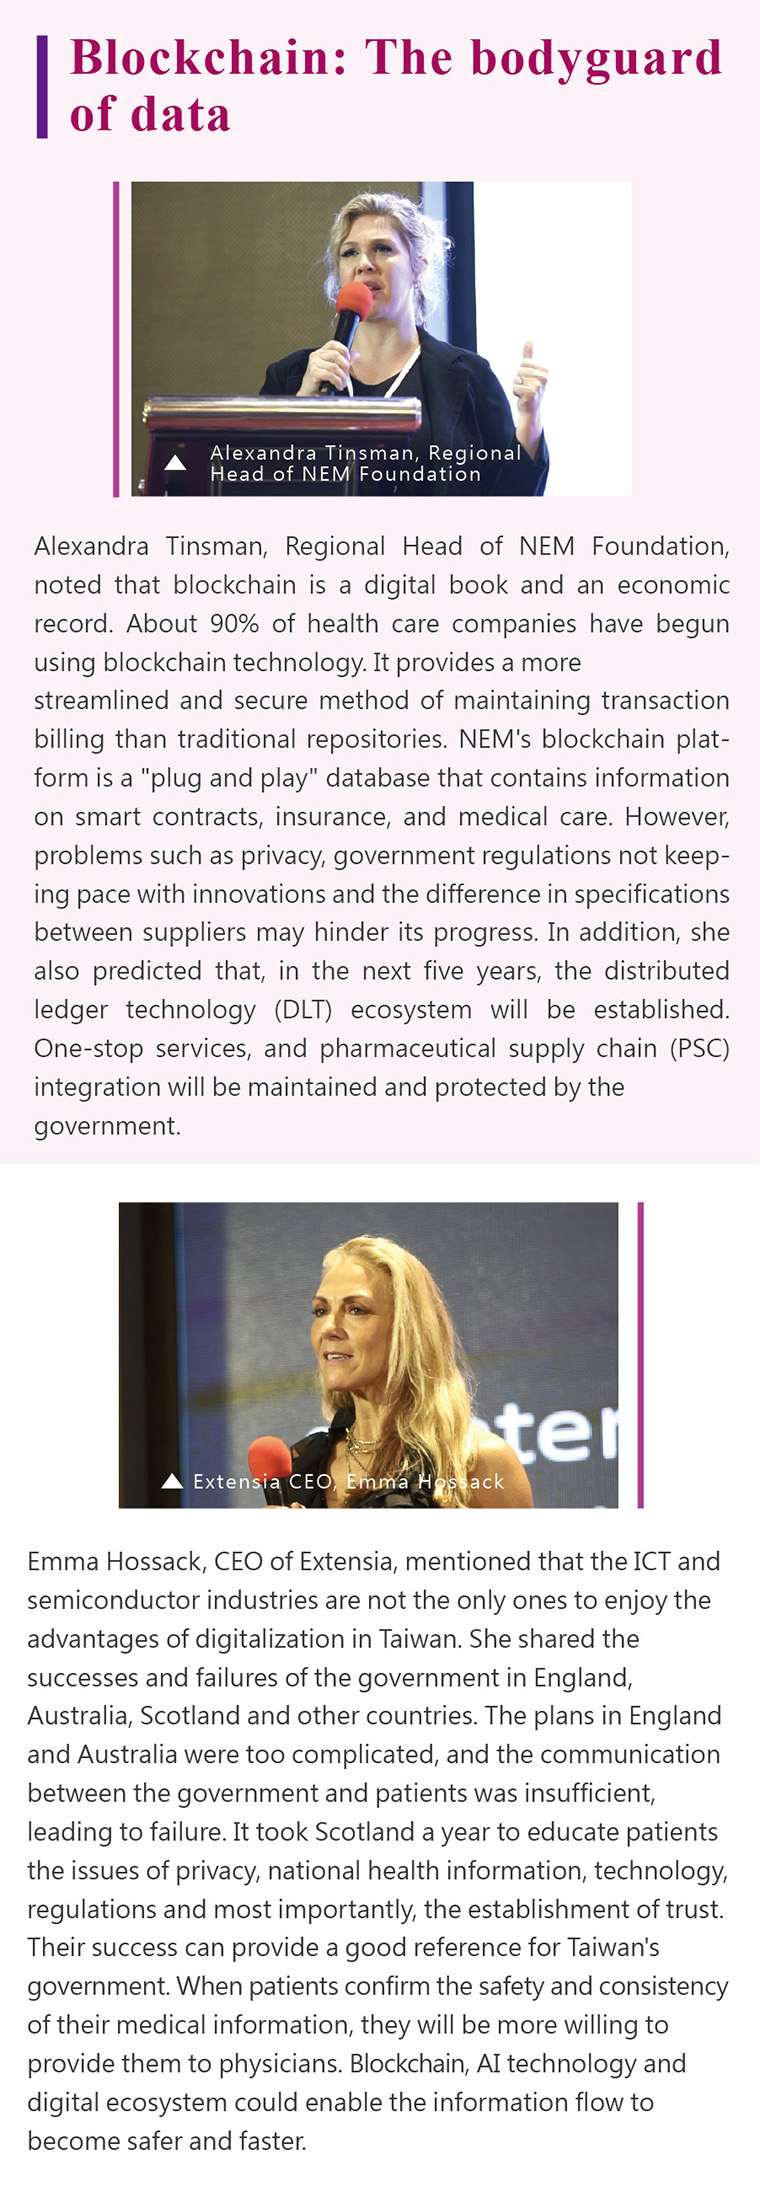 Alexandra Tinsman, Regional Head of NEM Foundation, noted that blockchain is a digital book and an economic record. About 90% of health care companies have begun using blockchain technology. It provides a more streamlined and secure method of maintaining transaction billing than traditional repositories. NEM's blockchain platform is a 